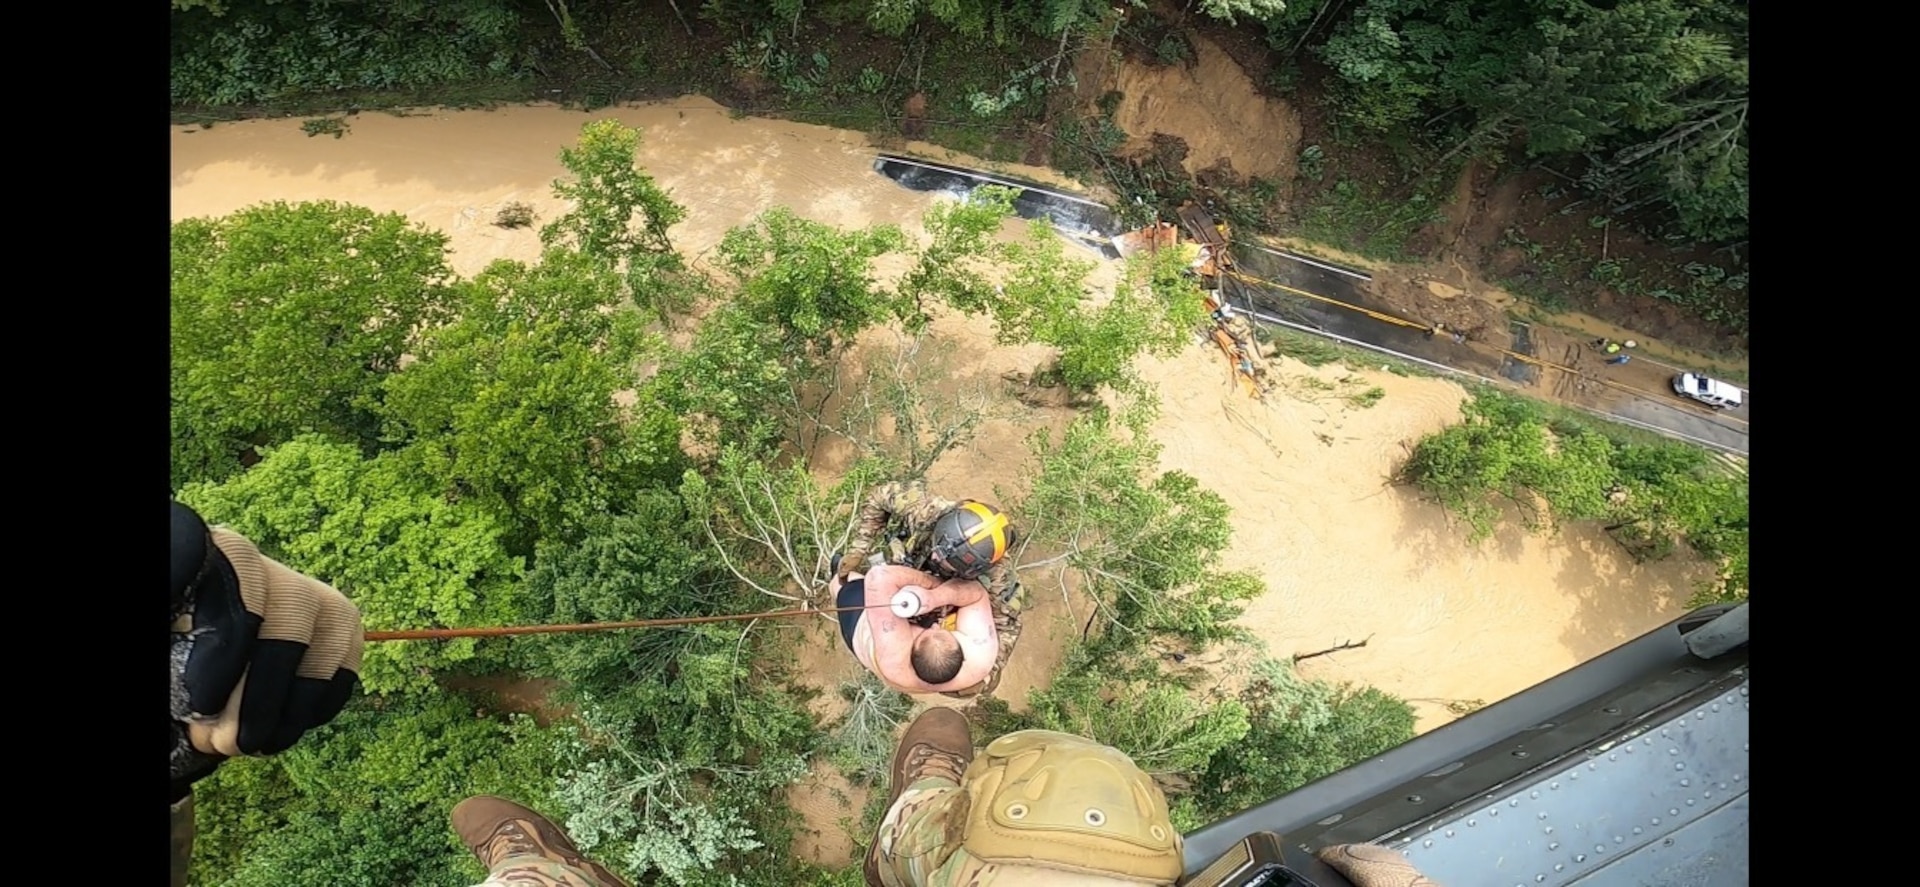 Kentucky Army National Guard's Detachment 1, Charlie Company 2/238th Aviation Regiment, MEDEVAC, conducts hoist and land rescue mission for victims of flooding in eastern Kentucky July 28, 2022. Pilots and crew have been working constantly for days to rescue victims trapped on house roofs, in trees and other high points to avoid floodwaters.